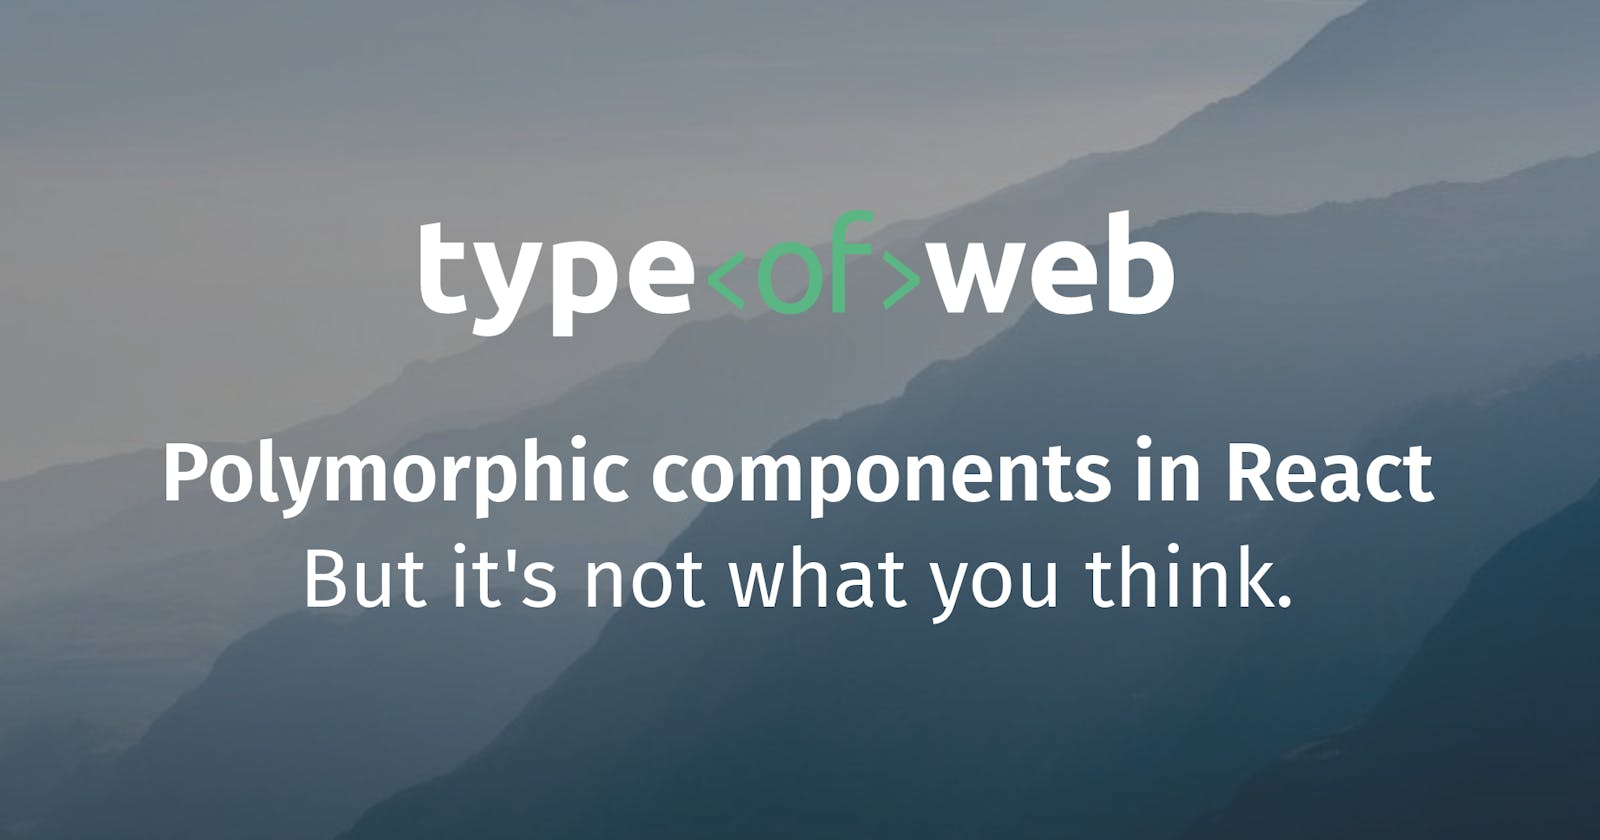 Polymorphic components in React